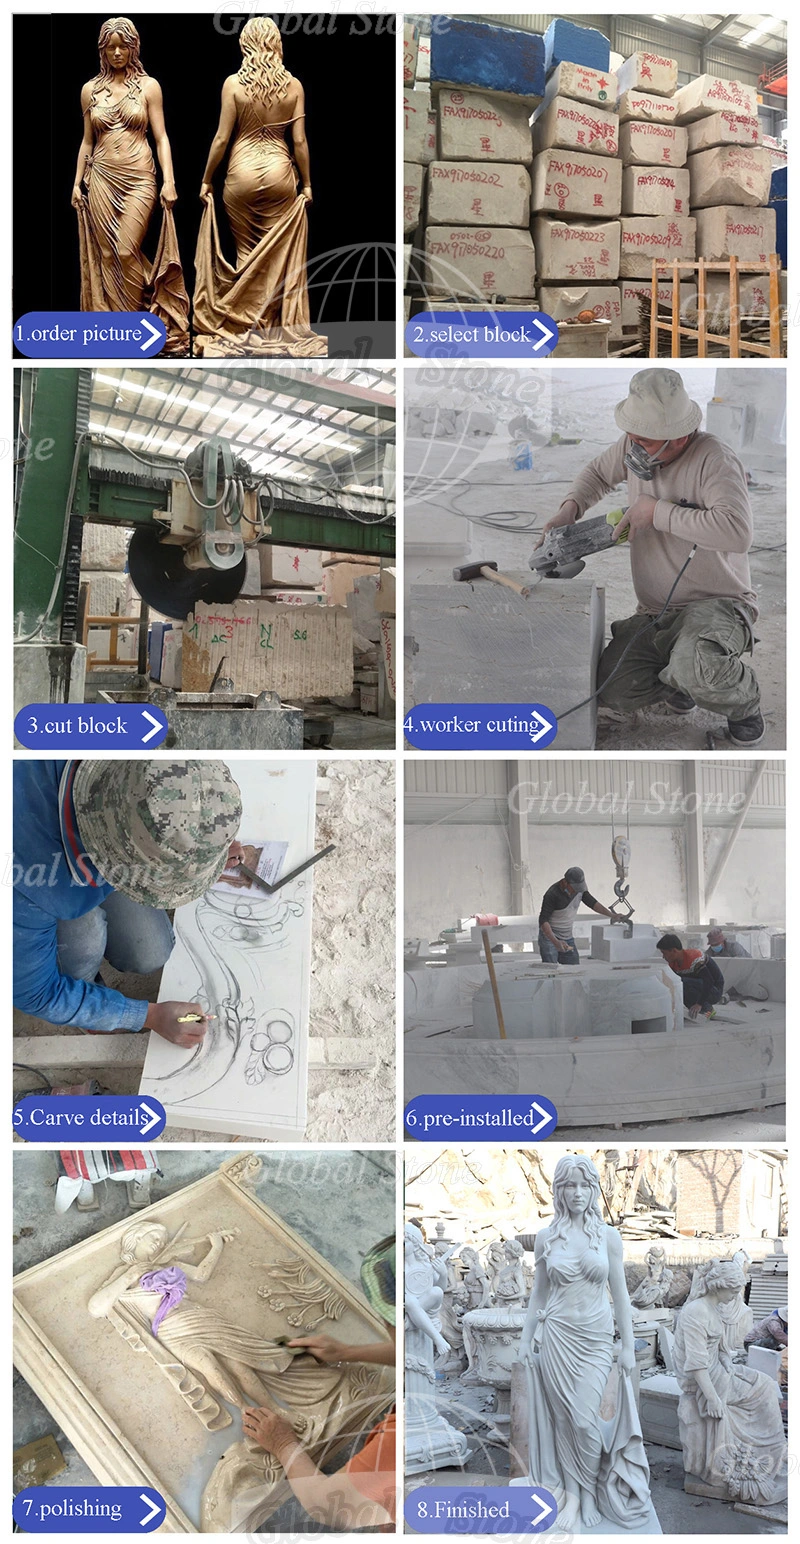 Factory Direct Sale Outdoor Marble Jesus Christ Statues (GSS-241)